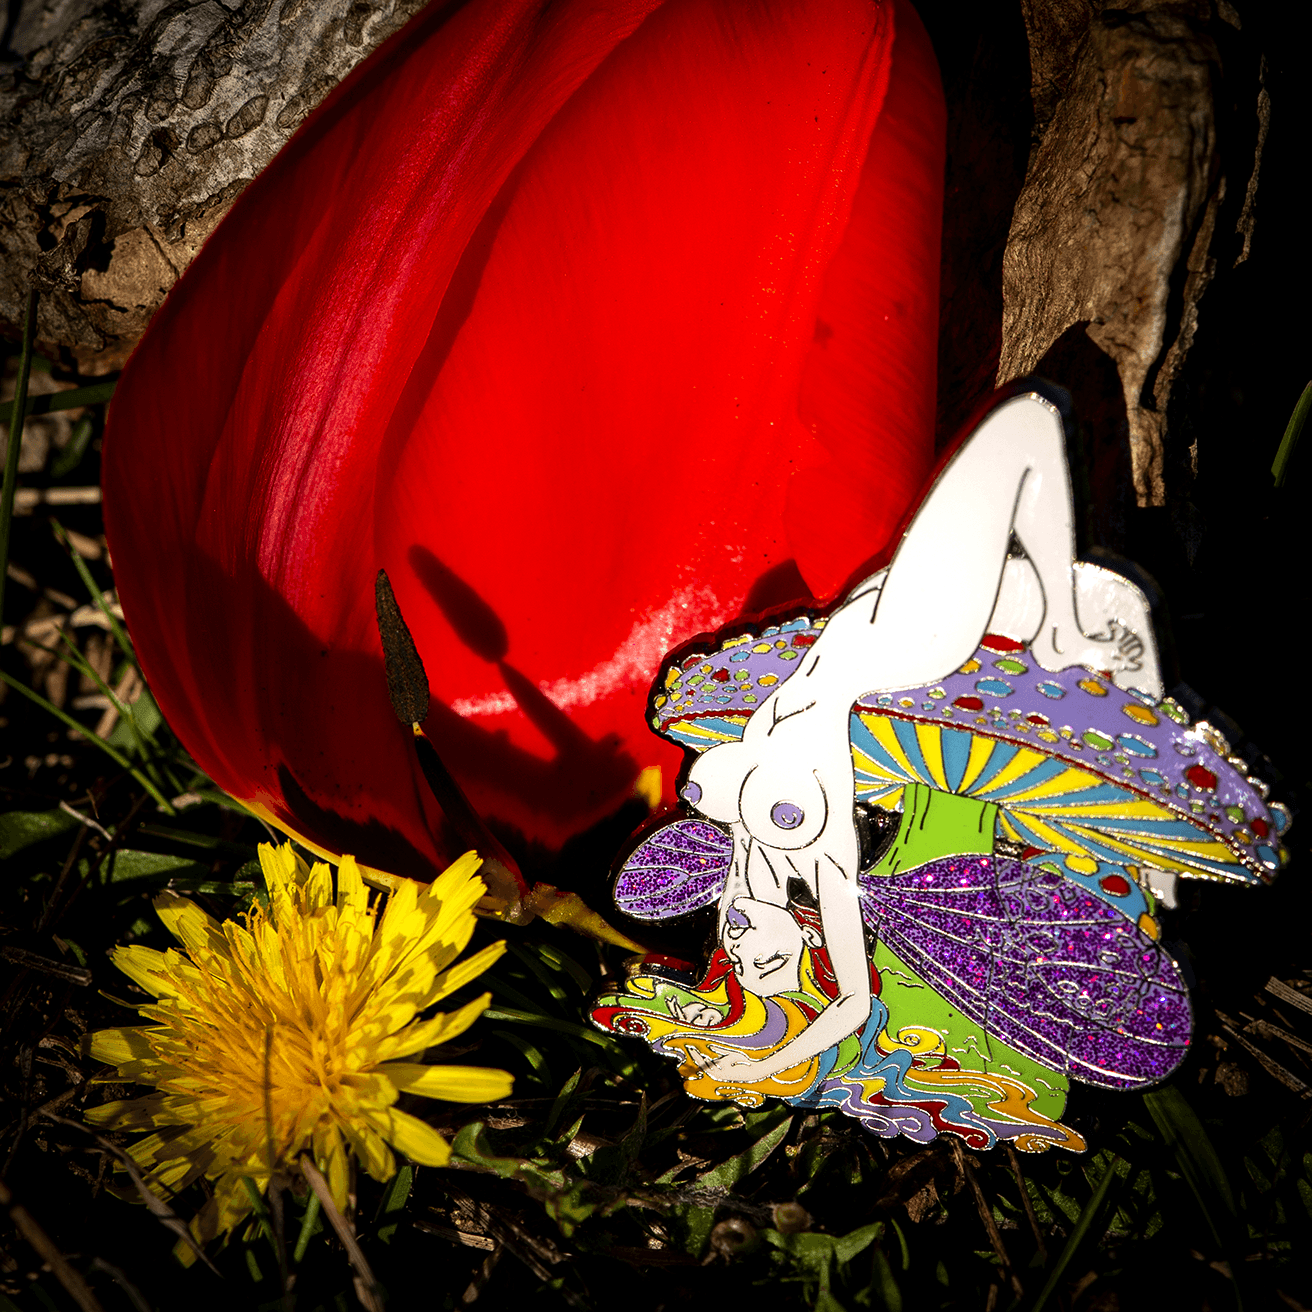 Fairy & Mushrooms Pin - Limited Editions by The Roving House